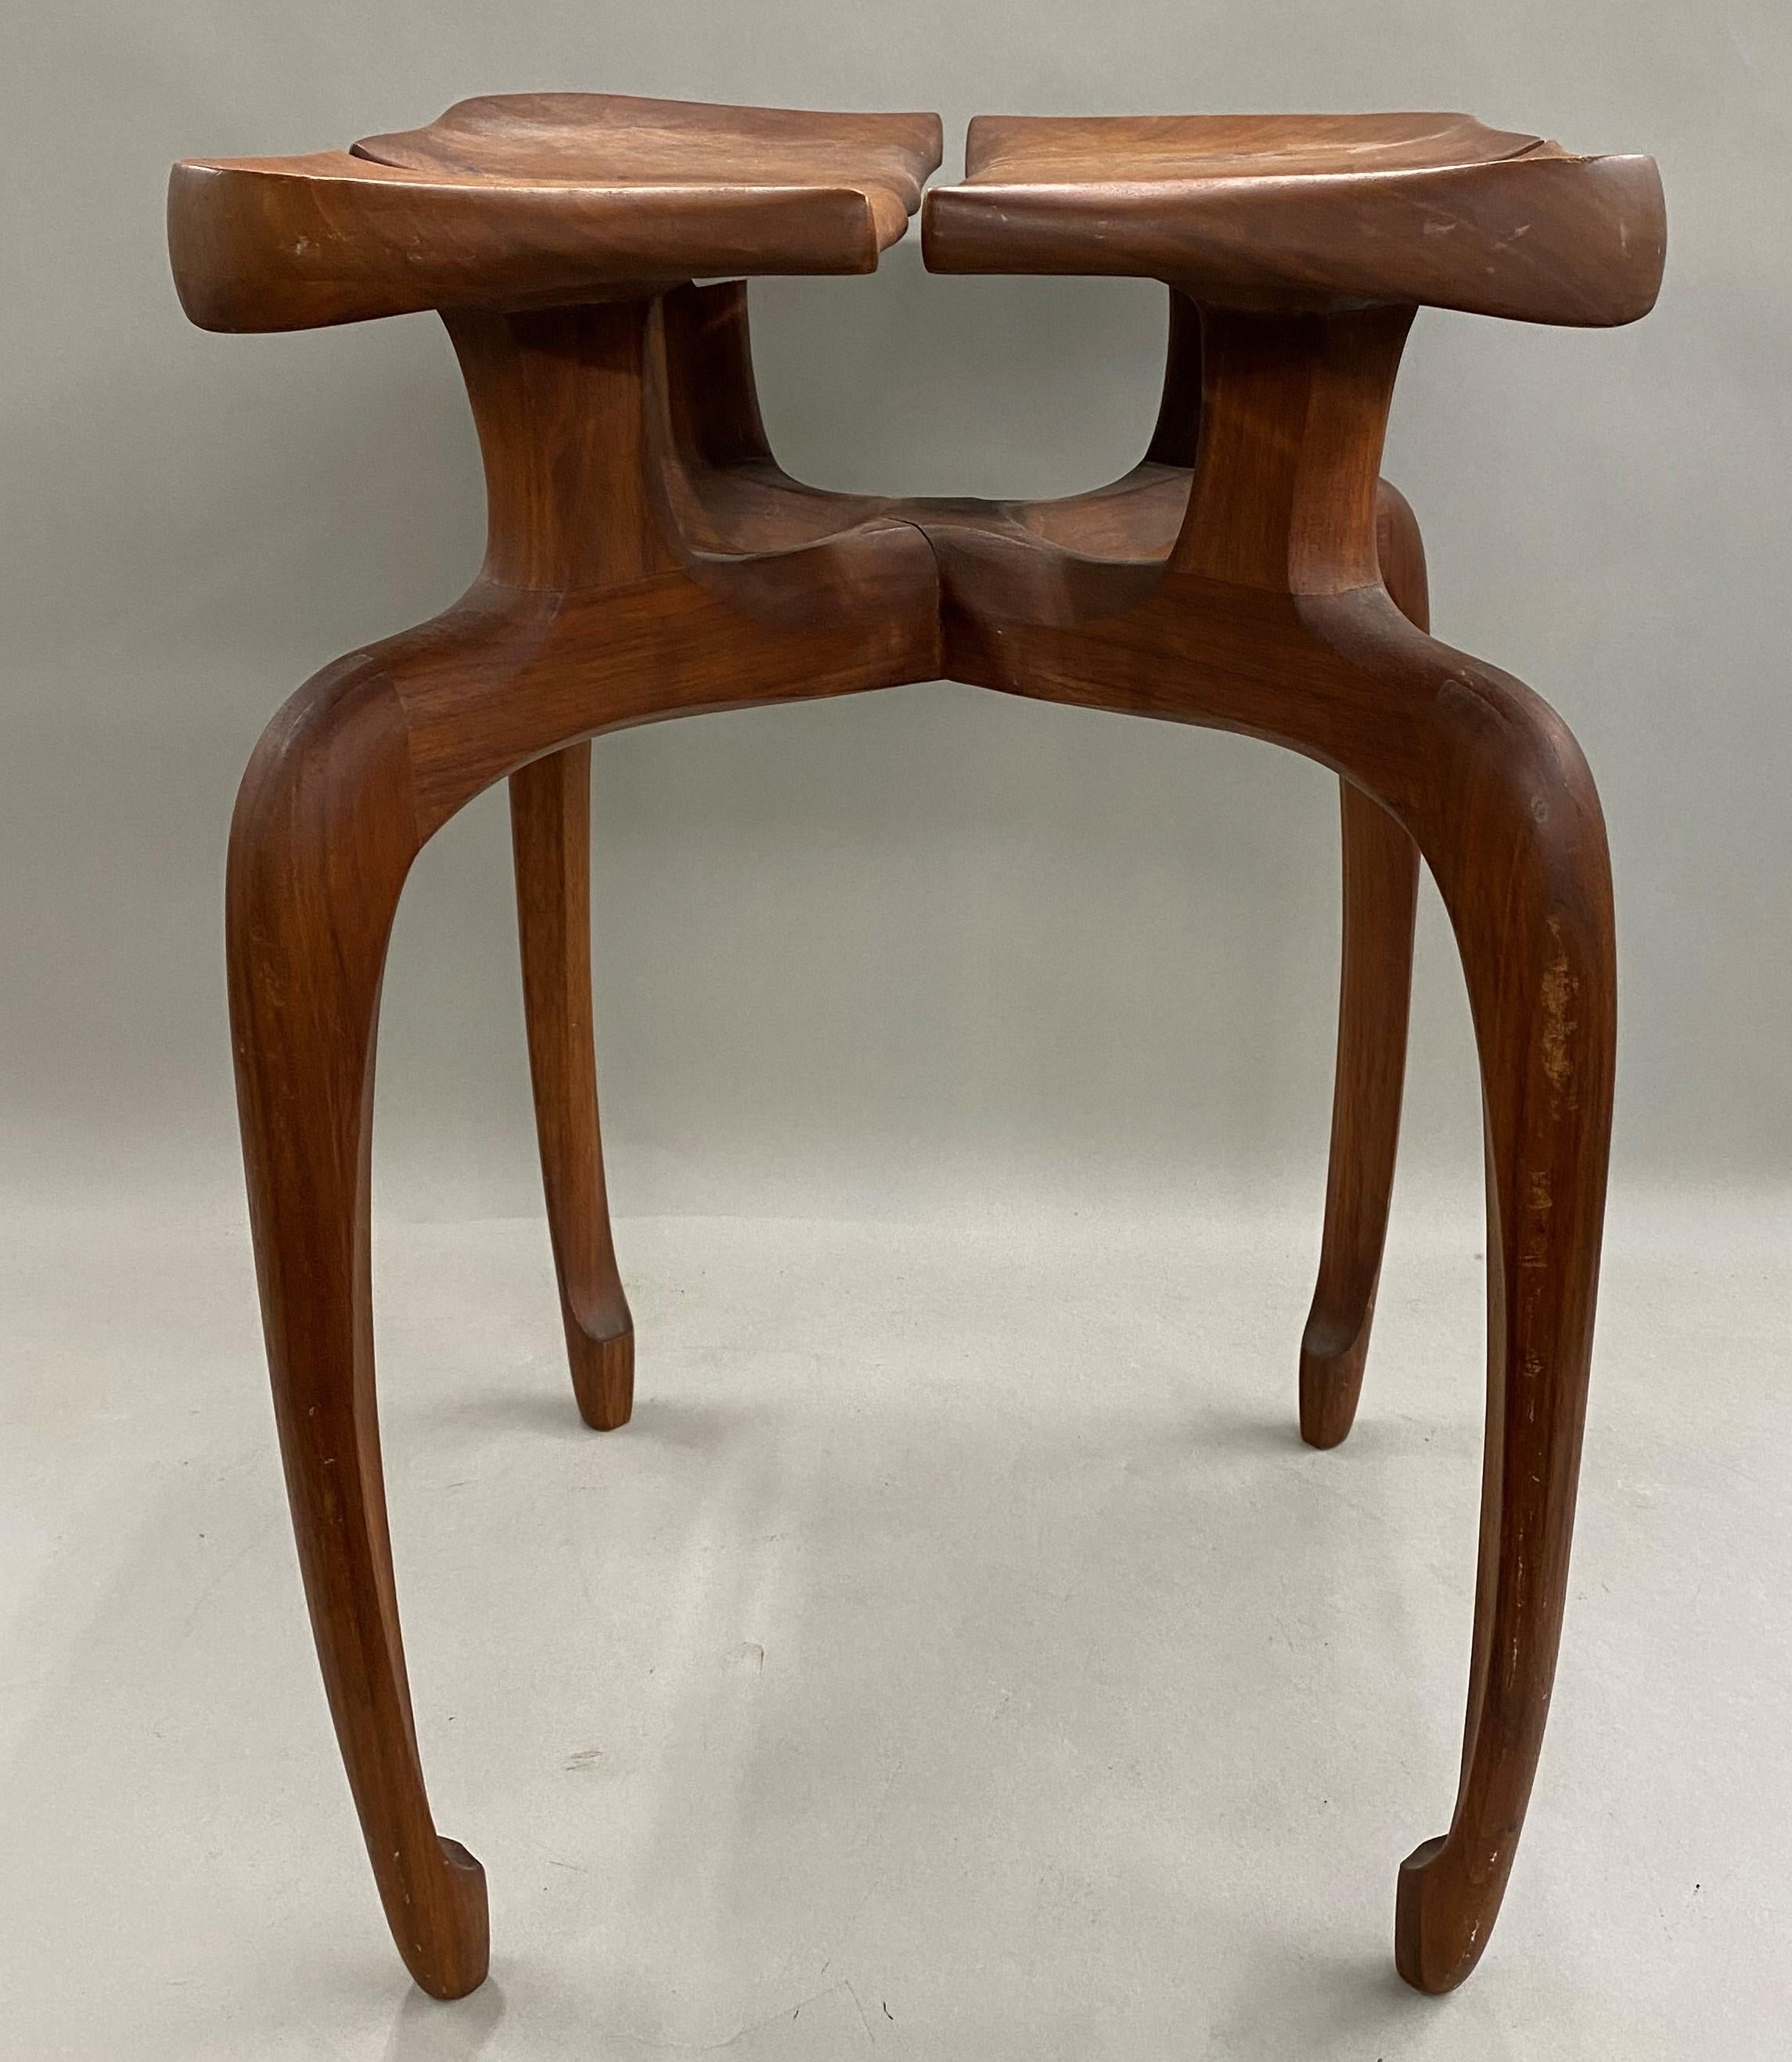 American Hand Carved Modernist Low Table with Four Petals circa 1972